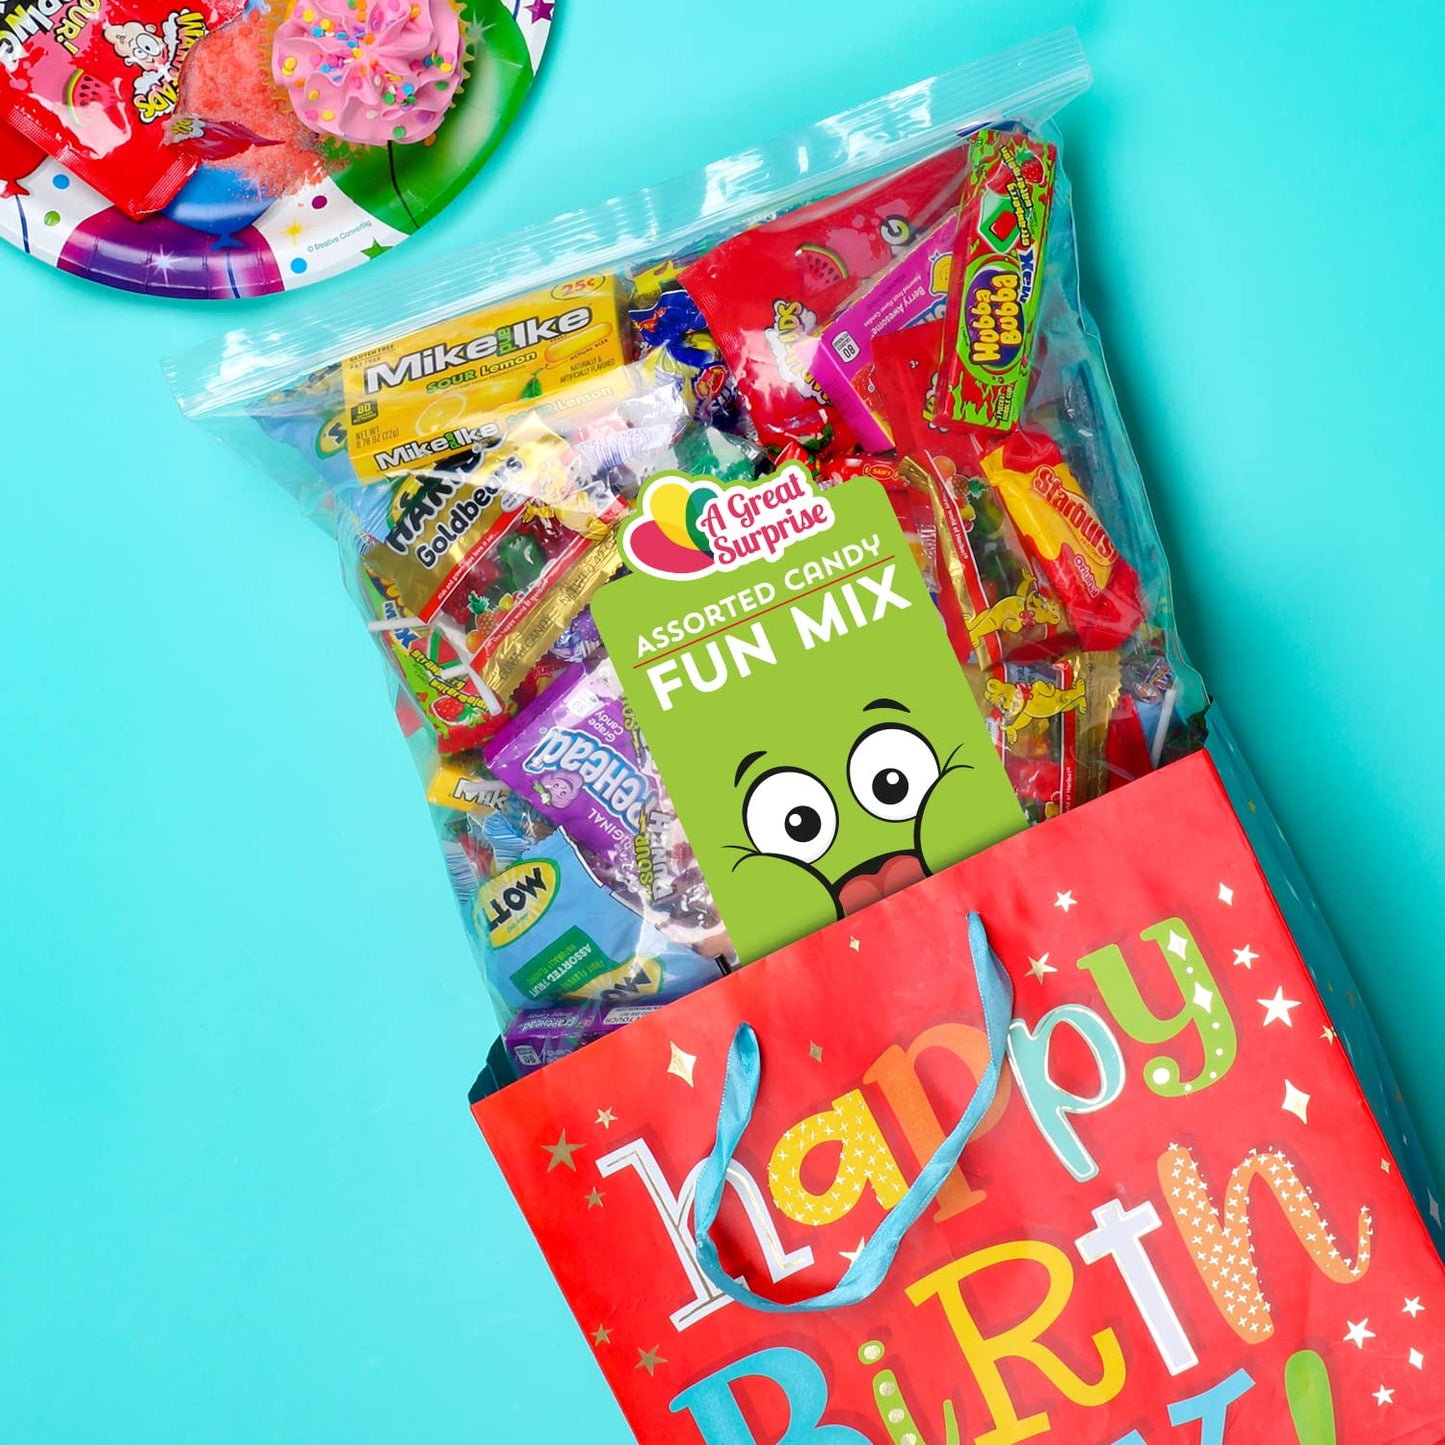 Assorted Candy - Bulk Candy - Party Mix - Goodie Bag Stuffers - Candy Variety Pack - Pinata Candy - Individually Wrapped Candies - Fun Size Candy - Bag Candy - 4 Pounds